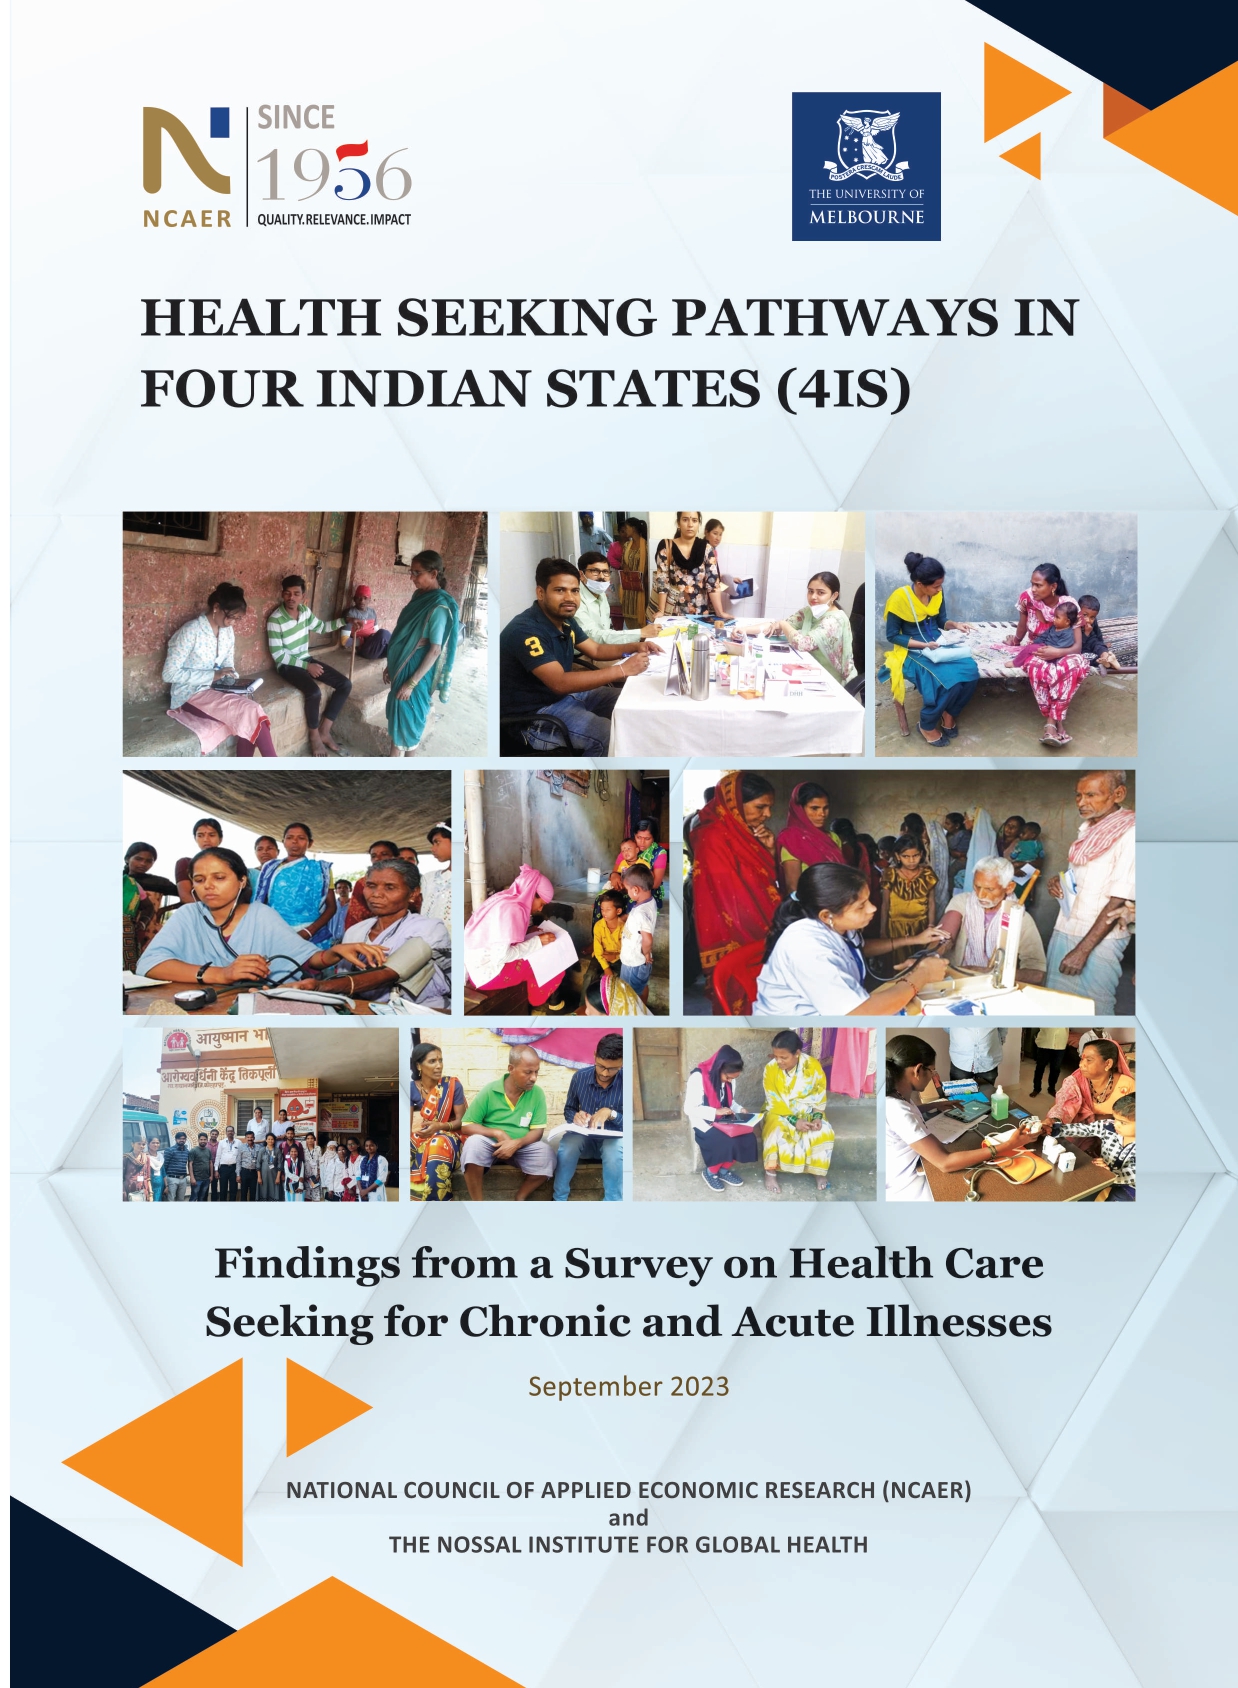 Report: Health Seeking Pathways in Four Indian States (4IS)